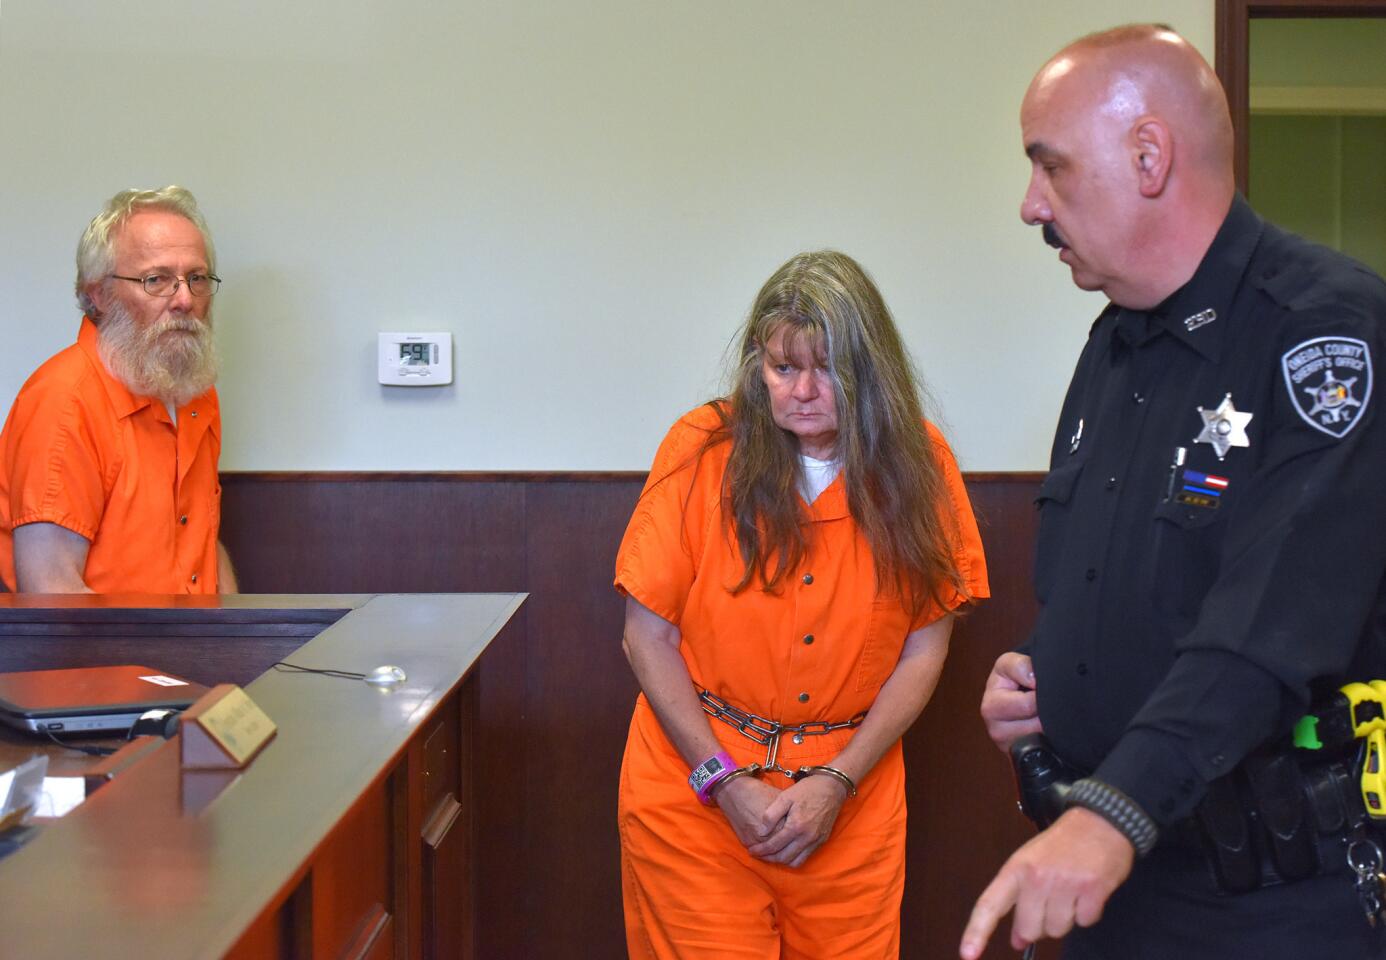 Bruce Leornard, left, and Deborah Leonard, center, enter the courtroom of before their arraignment, Tuesday, Oct. 13, 2015 in New Hartford, N.Y. The central New York couple have been charged with fatally beating their 19-year-old son inside a church, and four fellow church members have been charged with assault in an attack that also left the young man's brother severely injured, police said Tuesday.